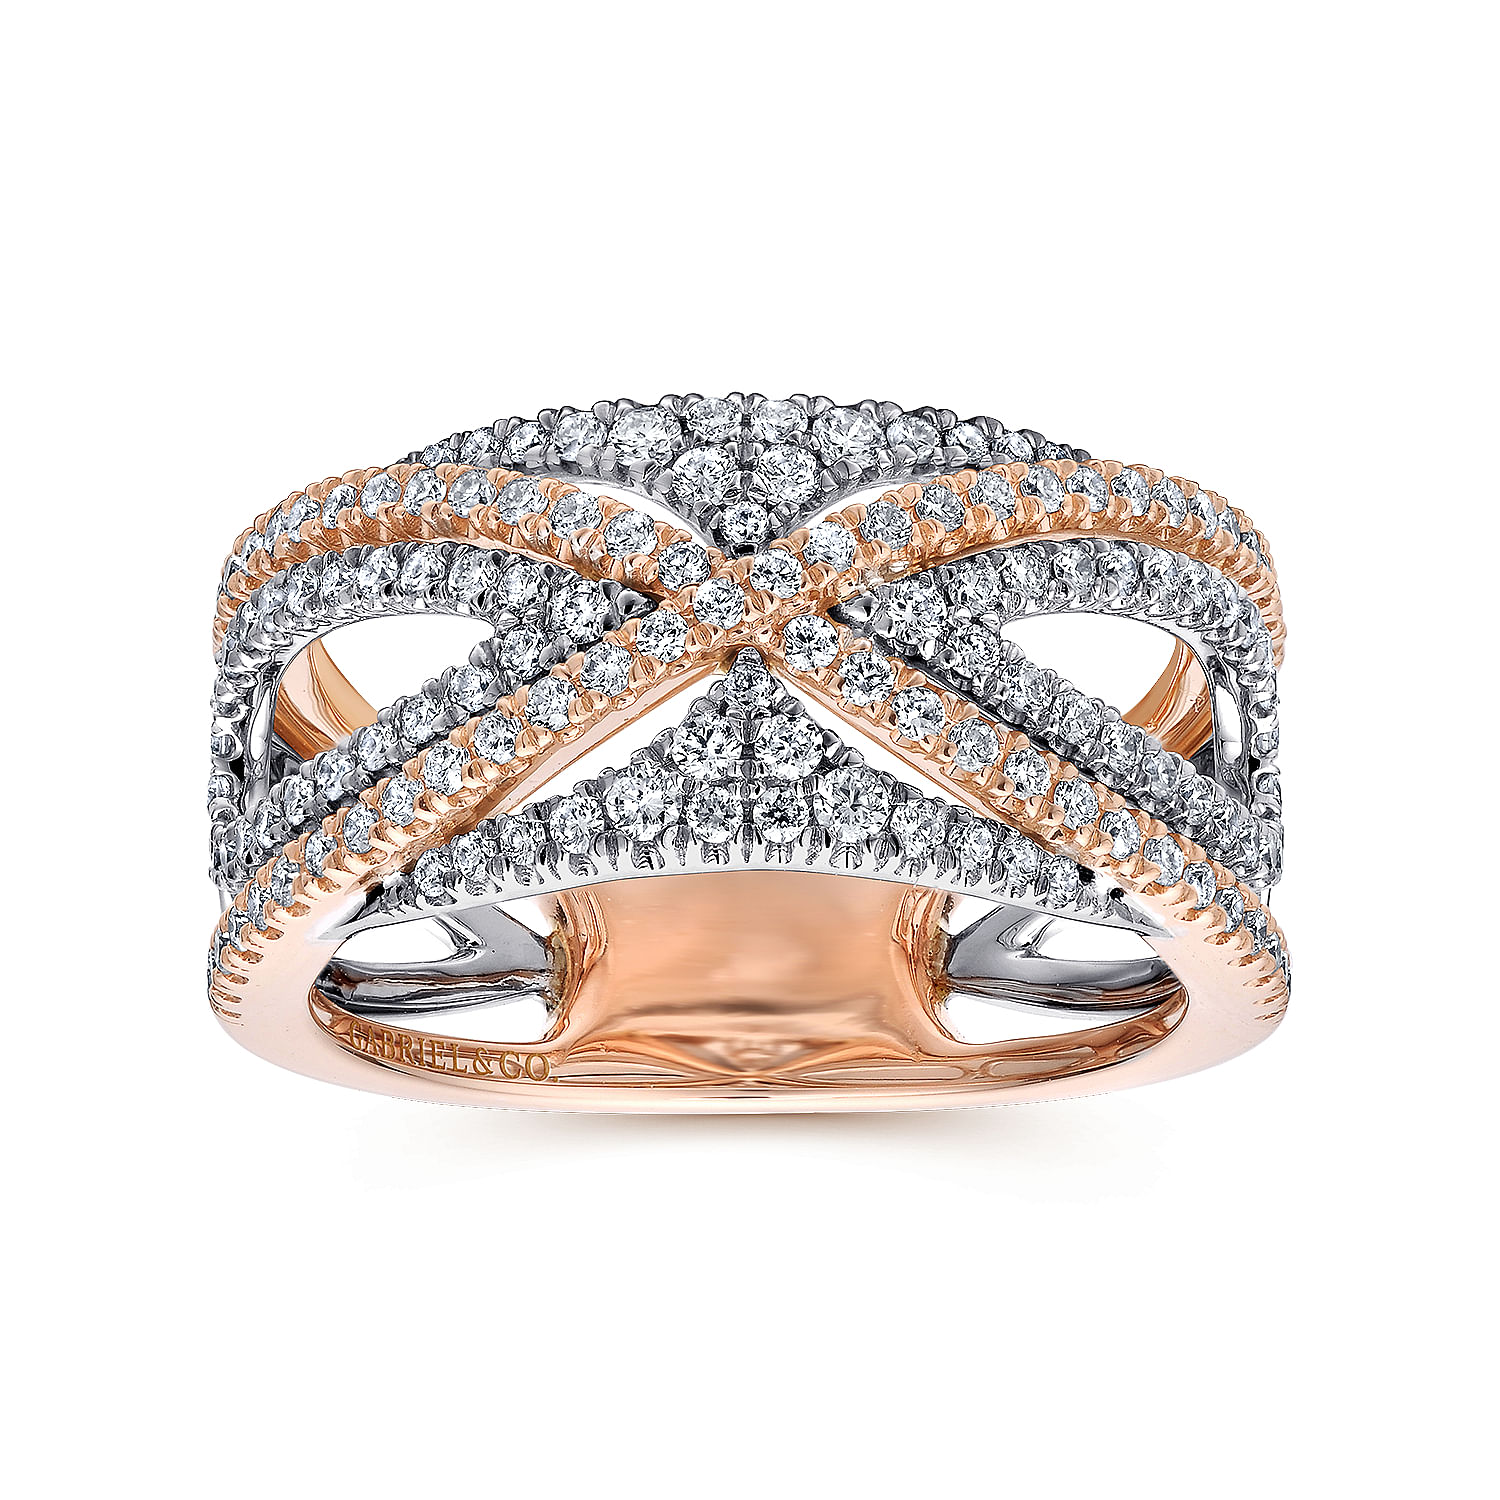 Wide 14K White and Rose Gold French Pave Set Diamond Anniversary Band - 0.67 ct - Shot 4